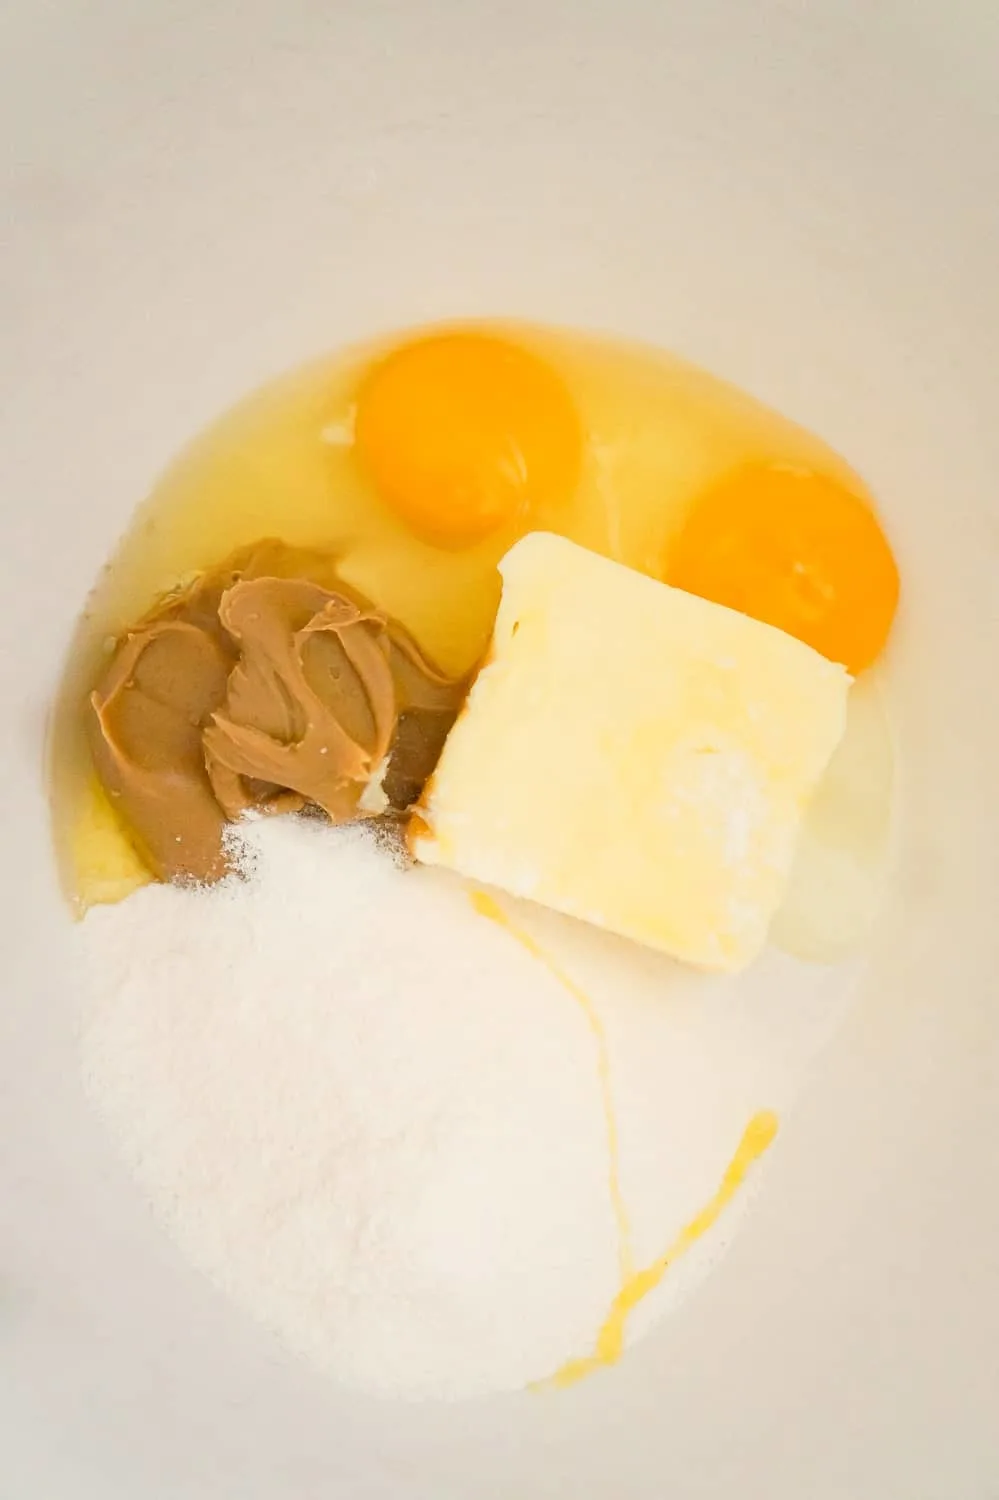 peanut butter, butter, eggs and banana instant pudding mix in a mixing bowl